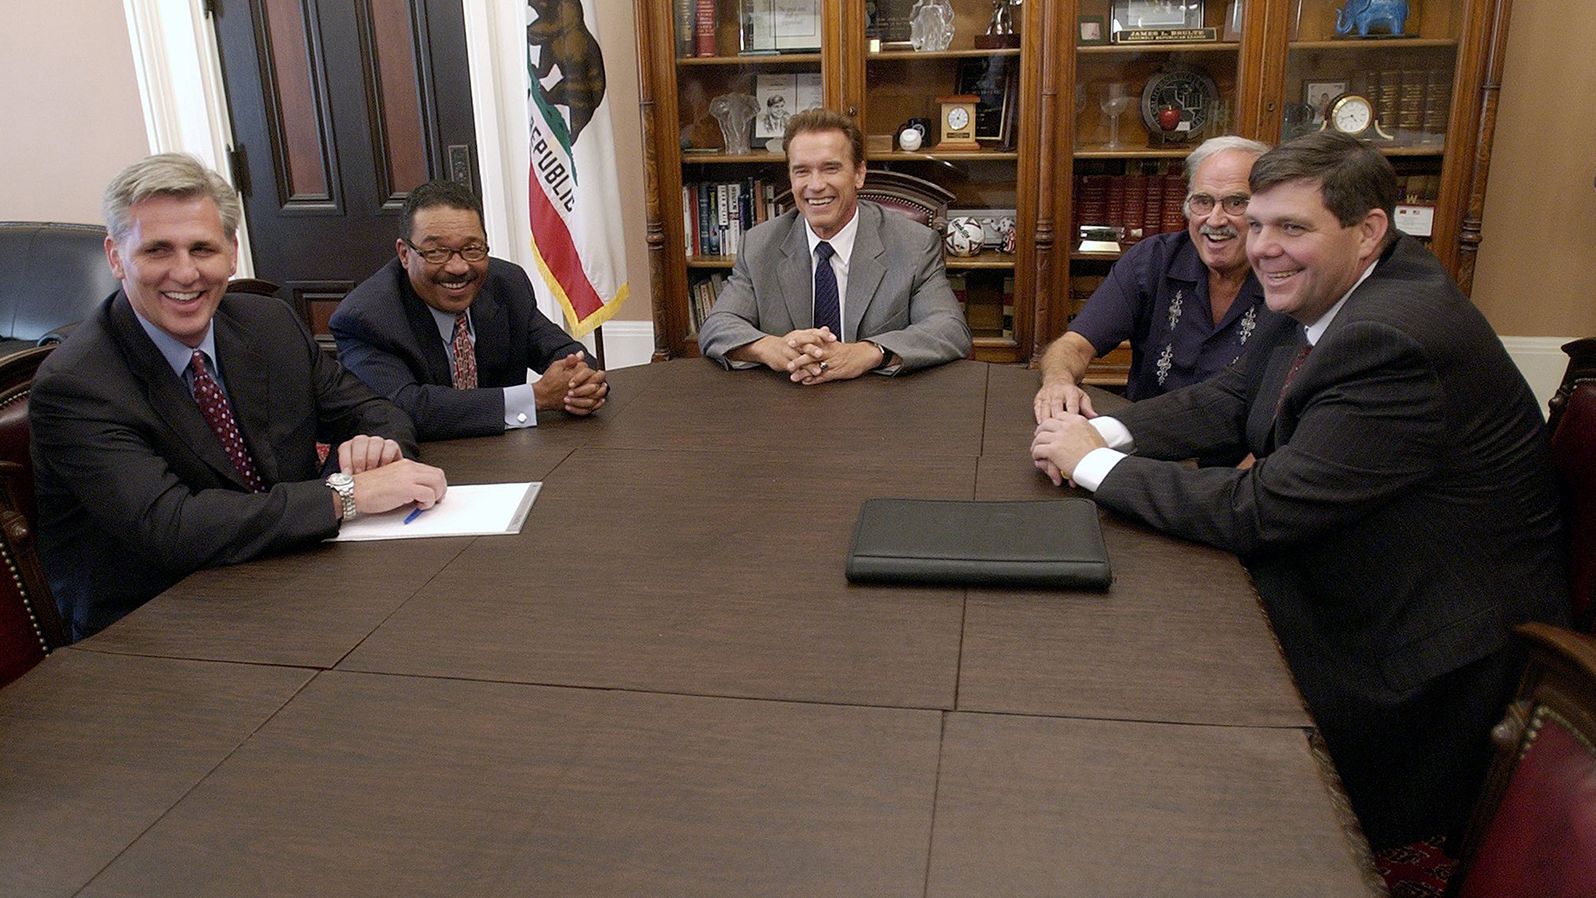 McCarthy, left, meets with California Gov.-elect Arnold Schwarzenegger, center, and other legislative leaders in 2003. McCarthy was elected to the California State Assembly in 2002.